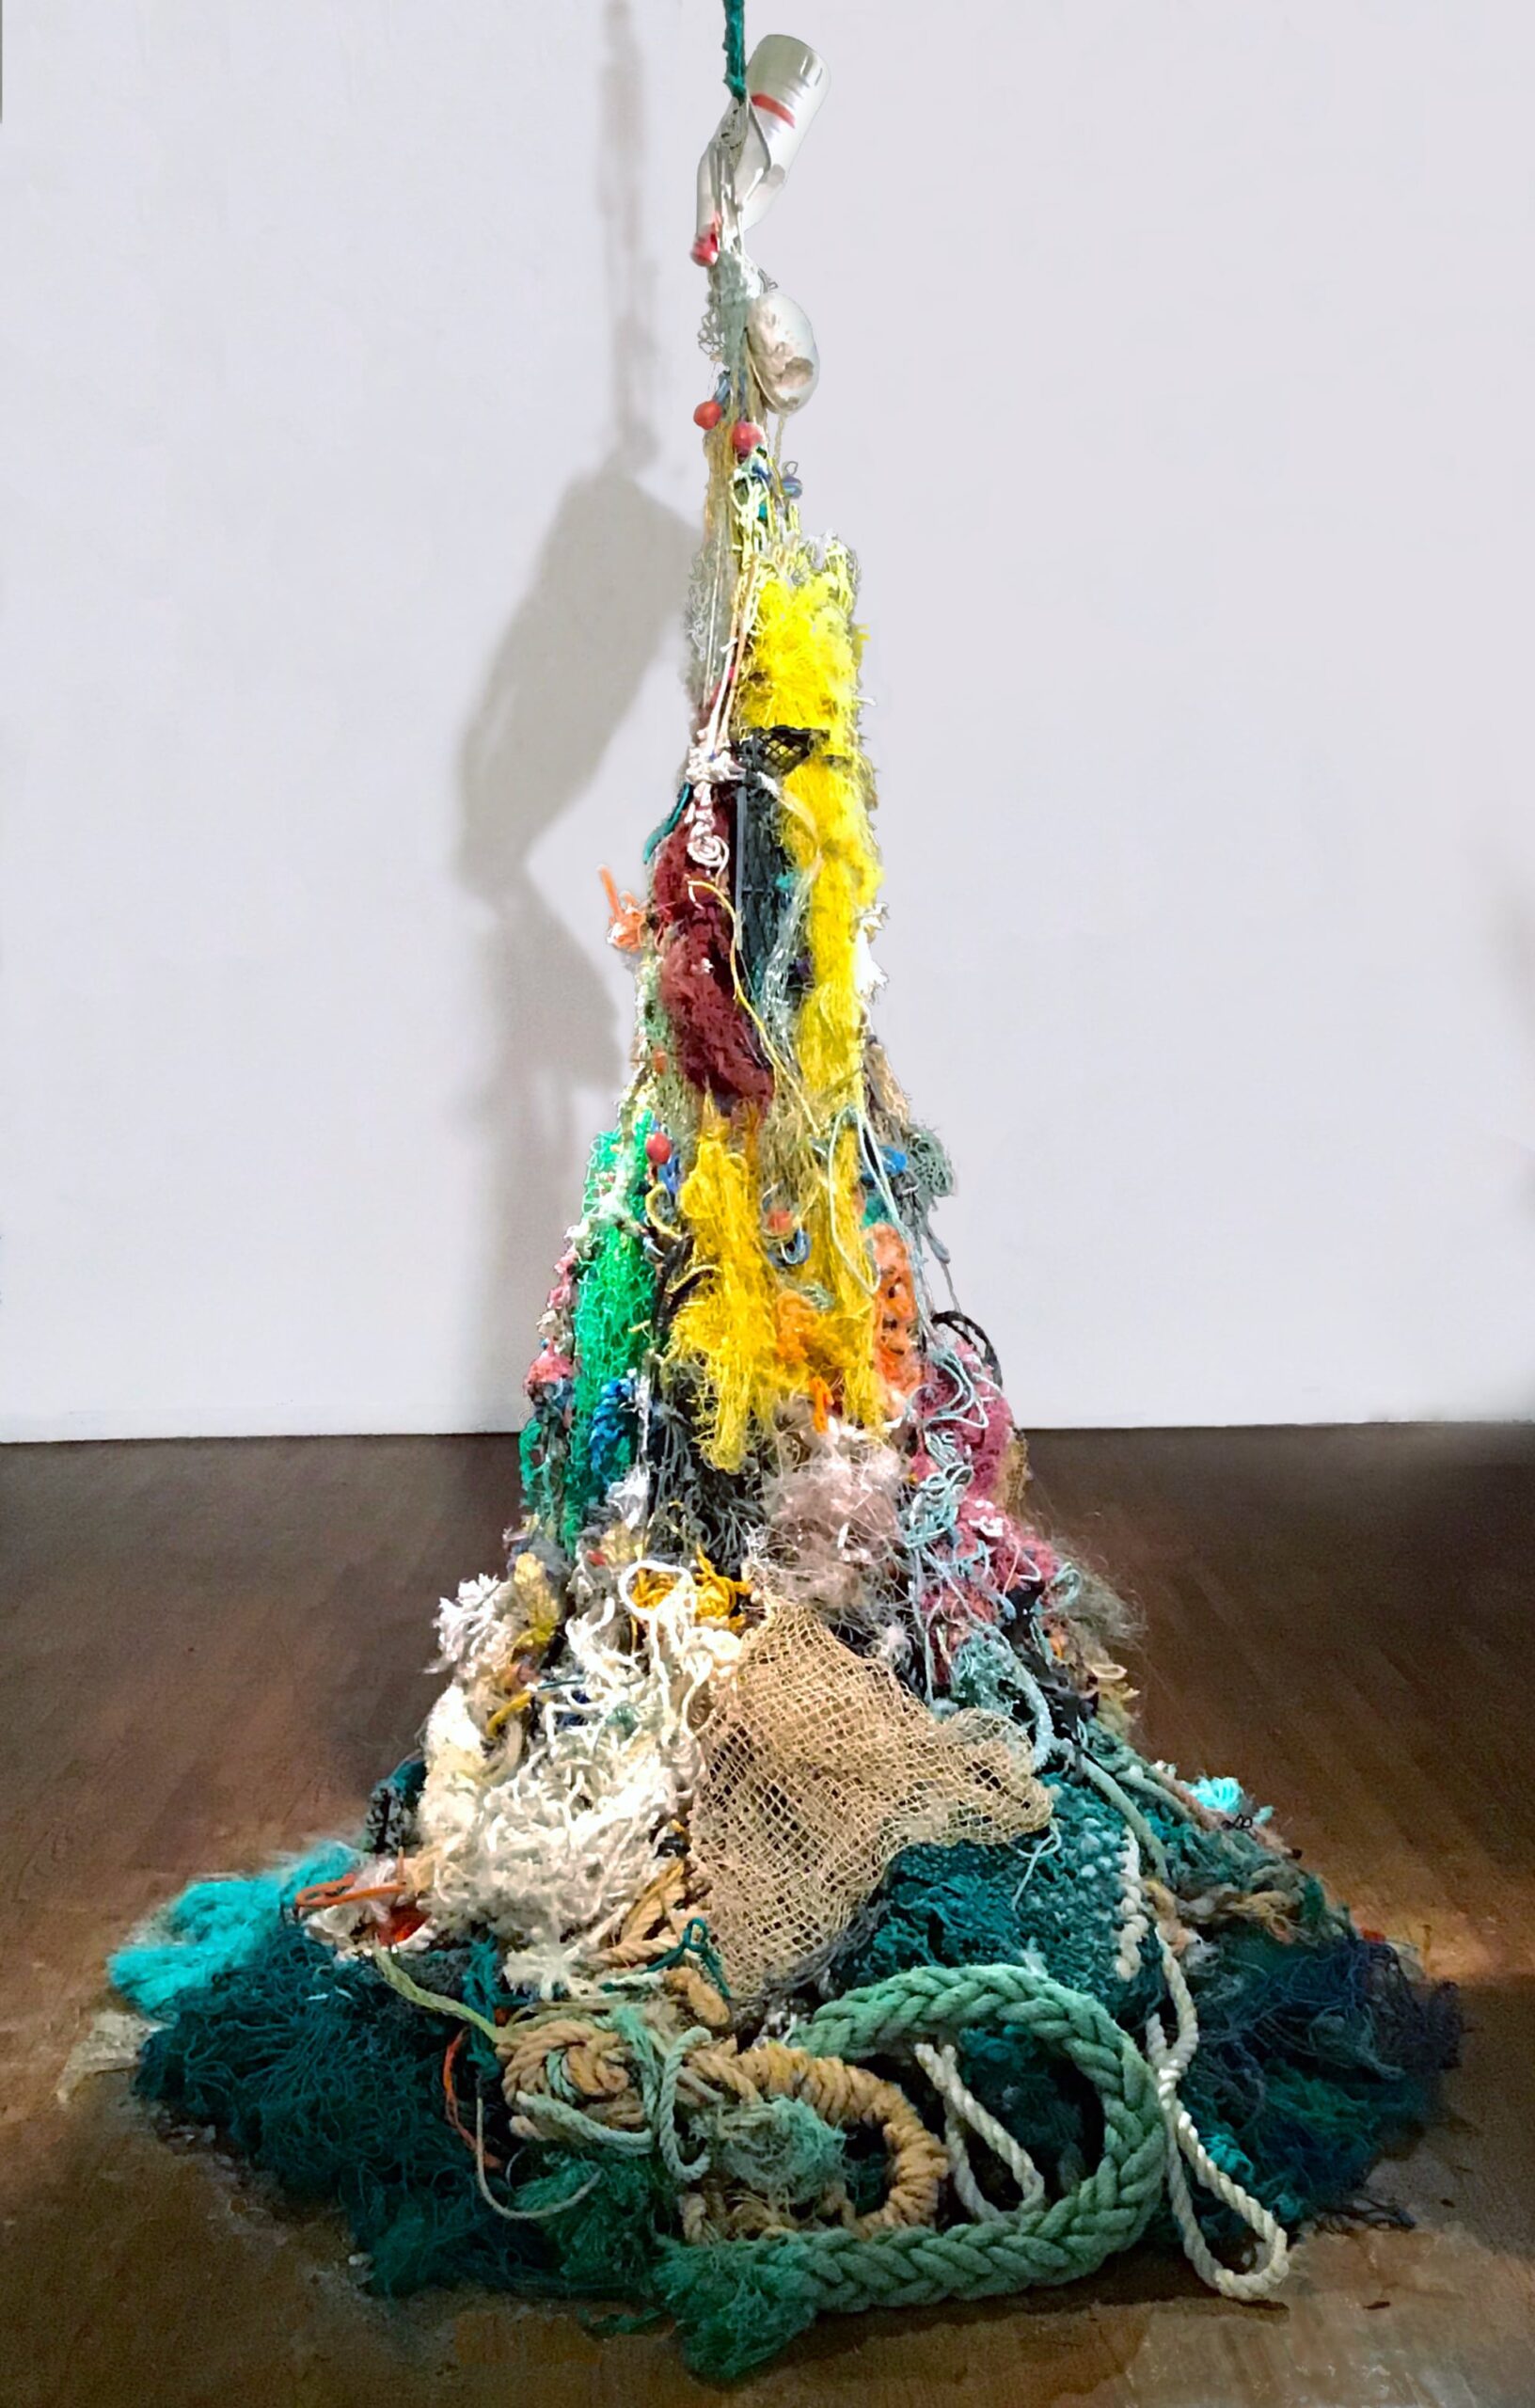 a tangled, suspended sculpture of colorful nets and ropes